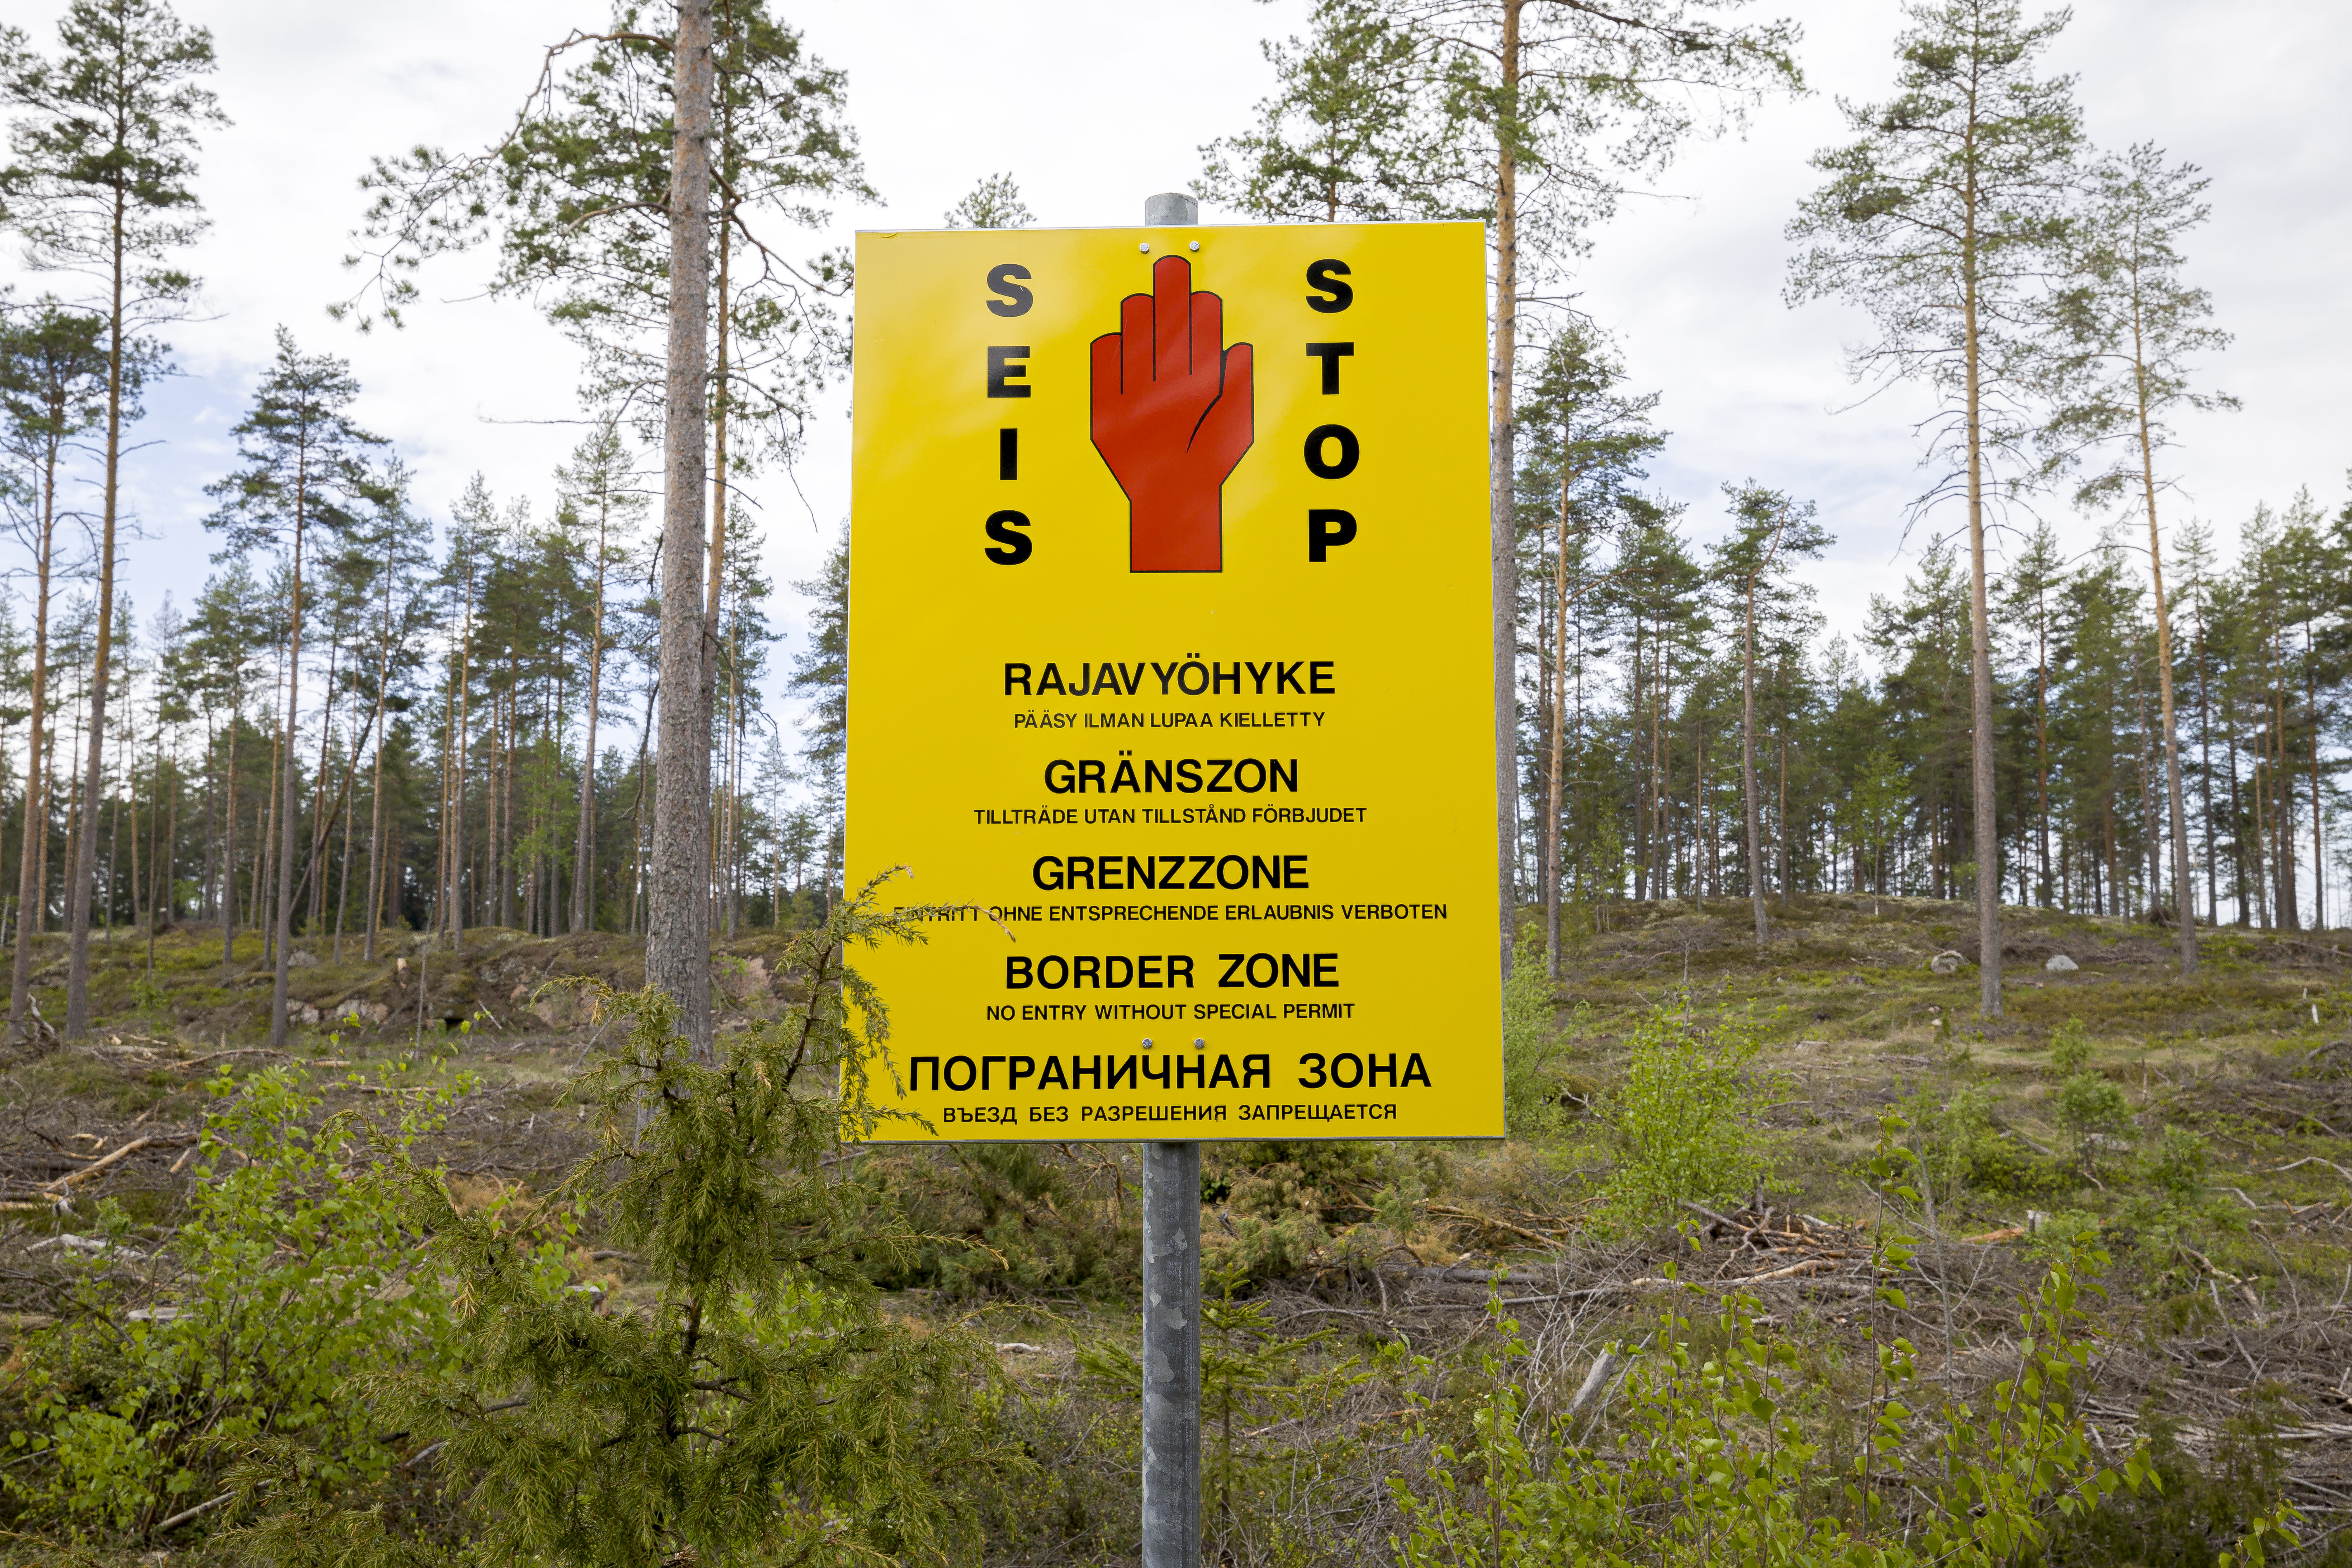 Finnish border authorities: More unauthorized crossings from Russia